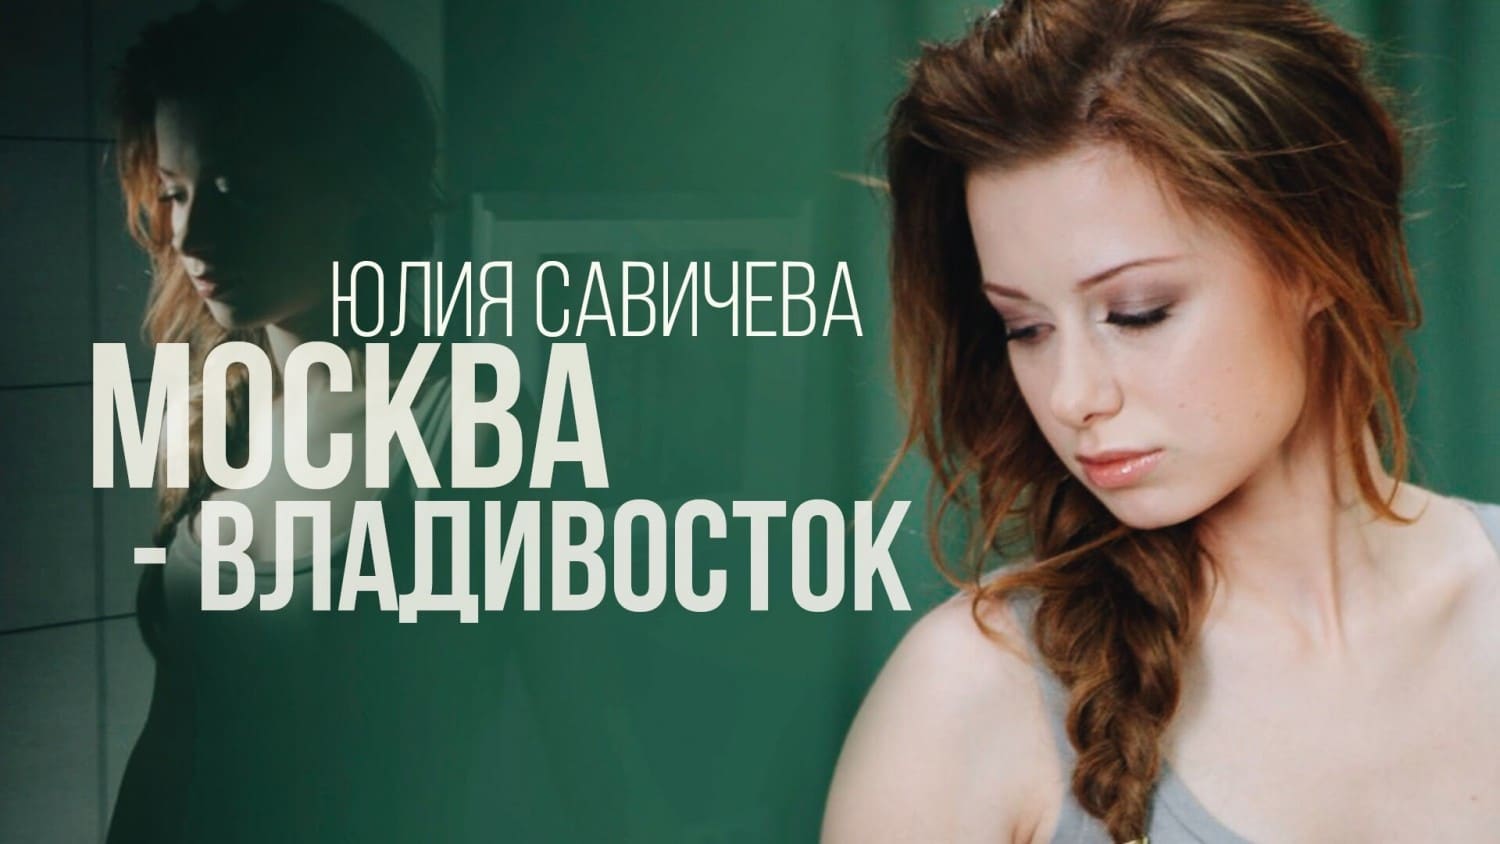 Russia Top Music August 2010